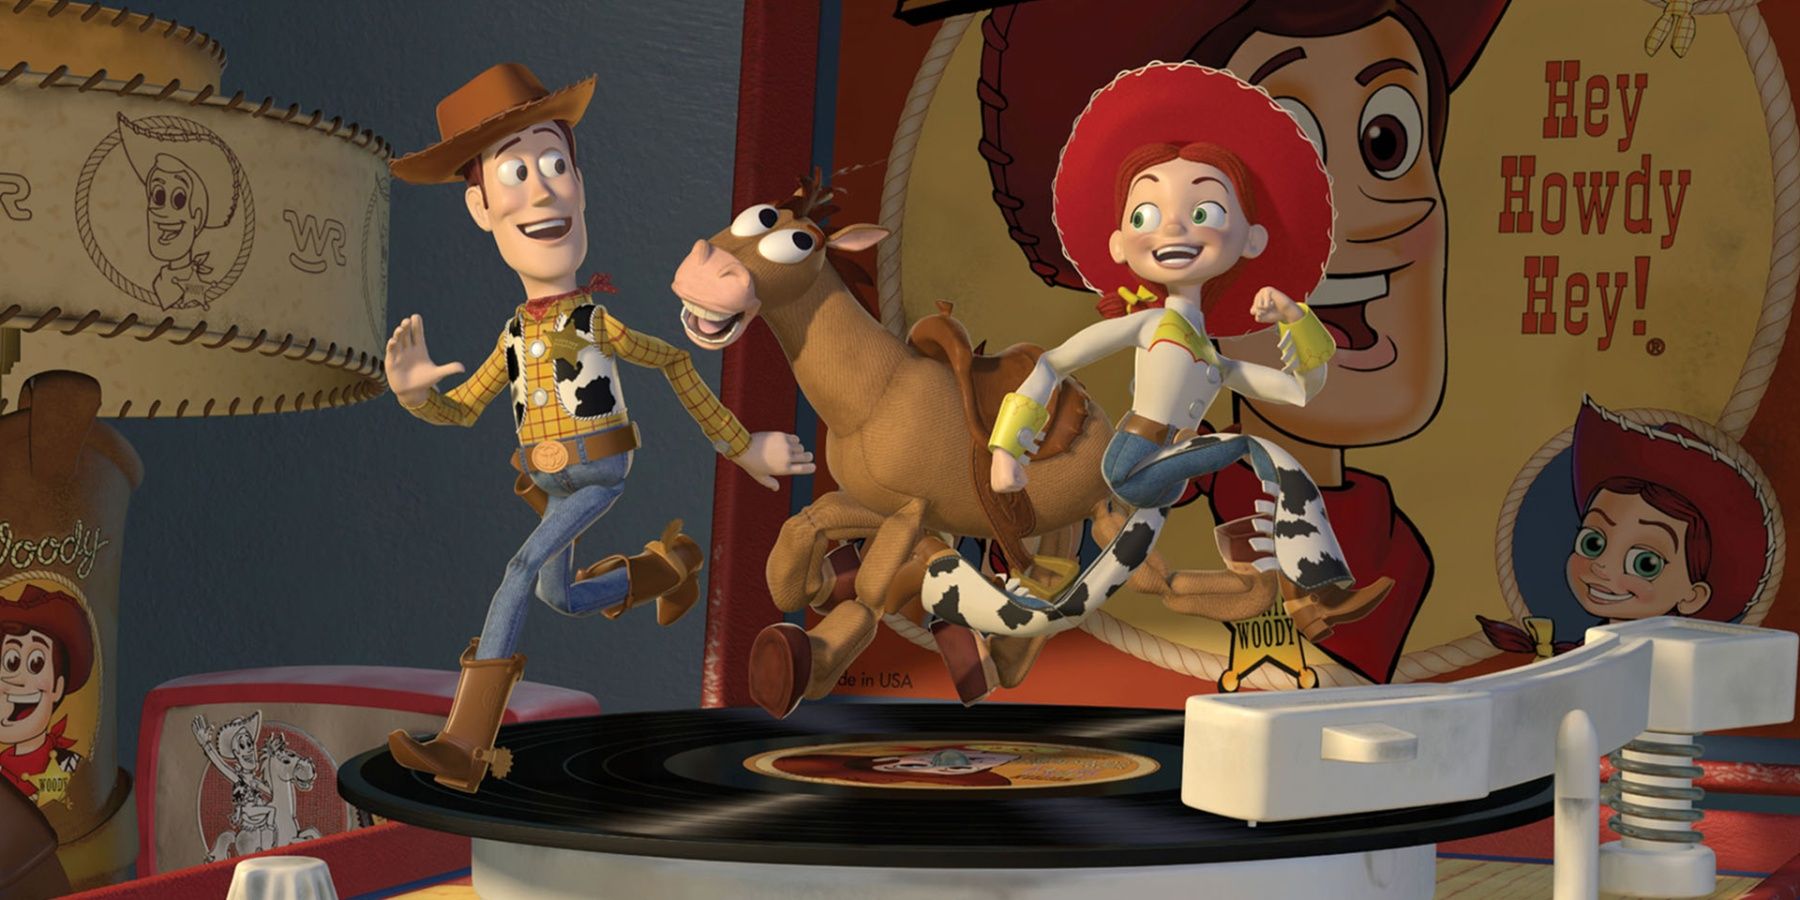 toy story 2